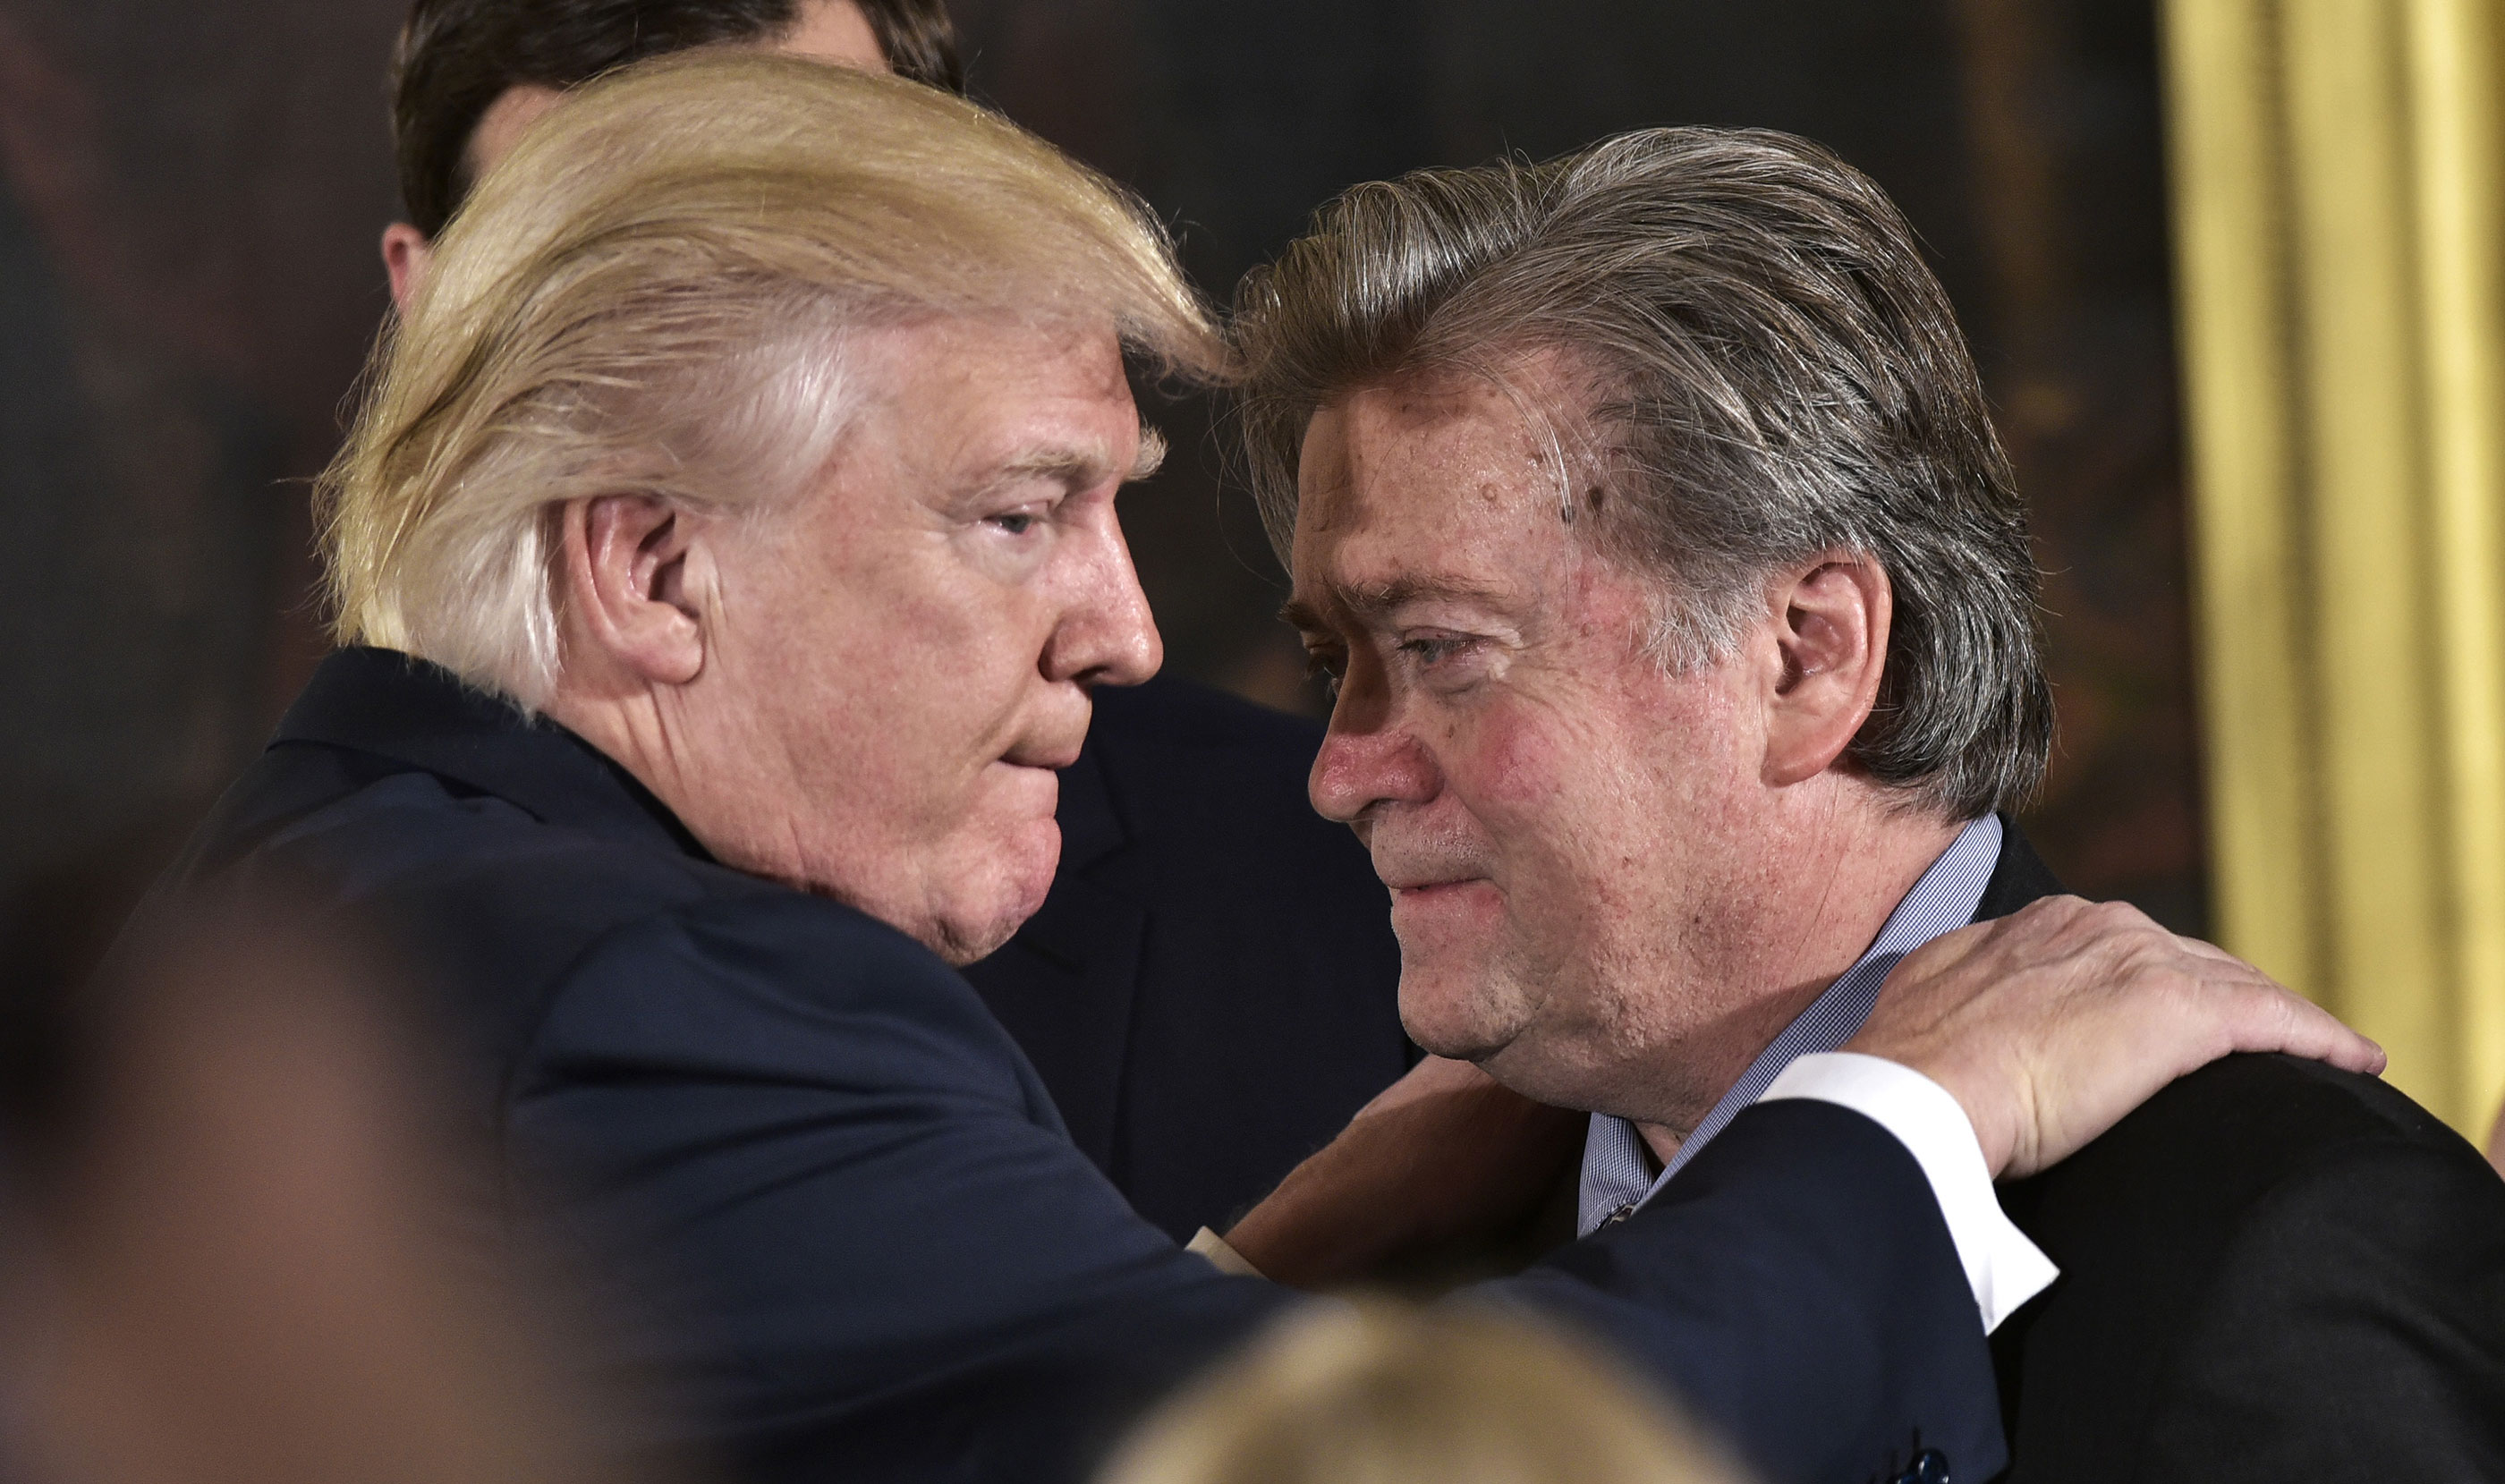 US President Donald Trump interacts with Steve Bannon during the swearing-in of senior staff at the White House on January 22, 2017 in Washington, D.C.